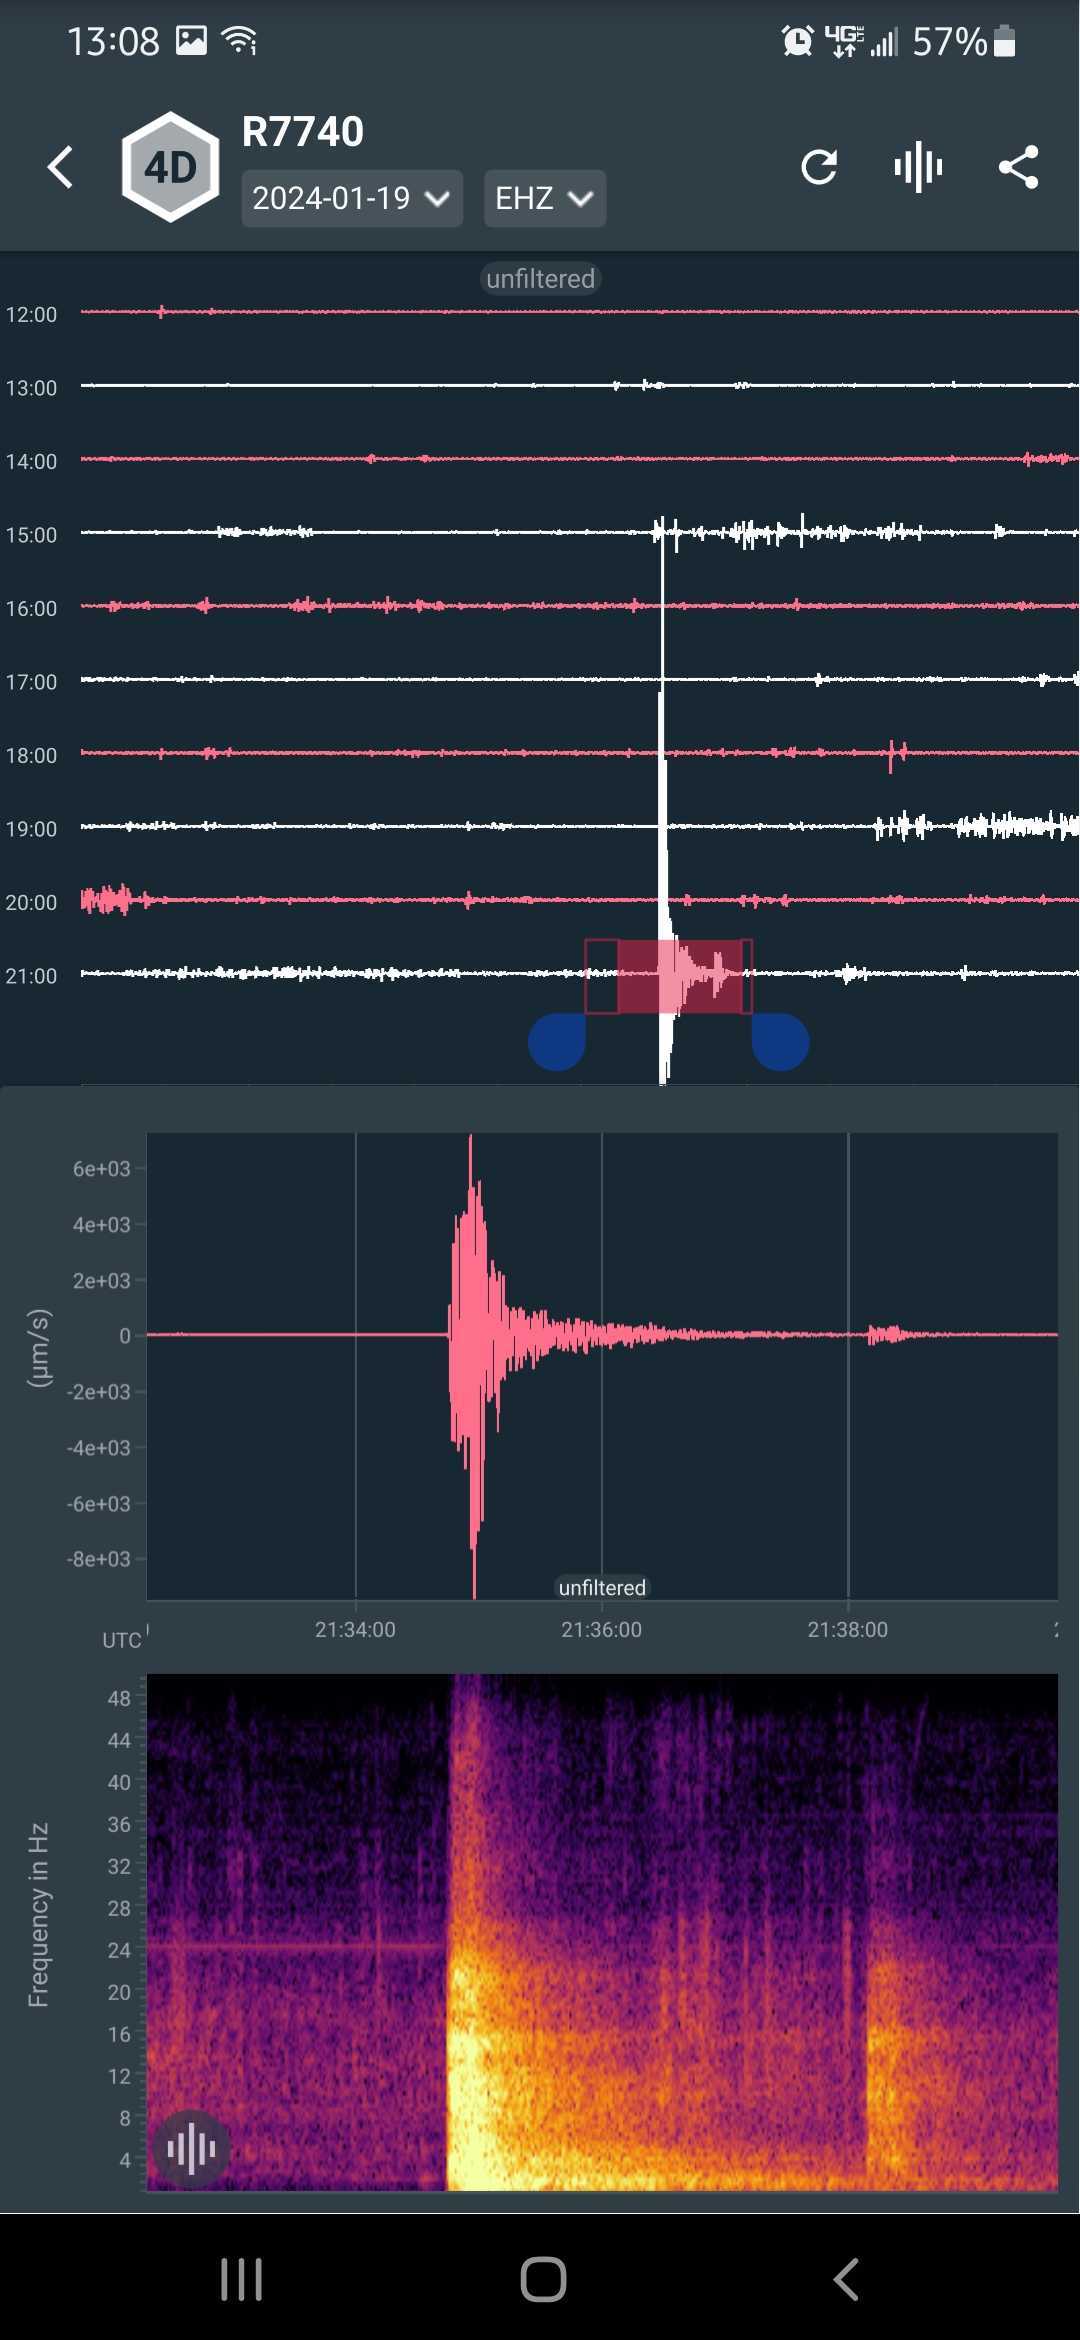 Small seismometer shows the strong shaking in Fairbanks.